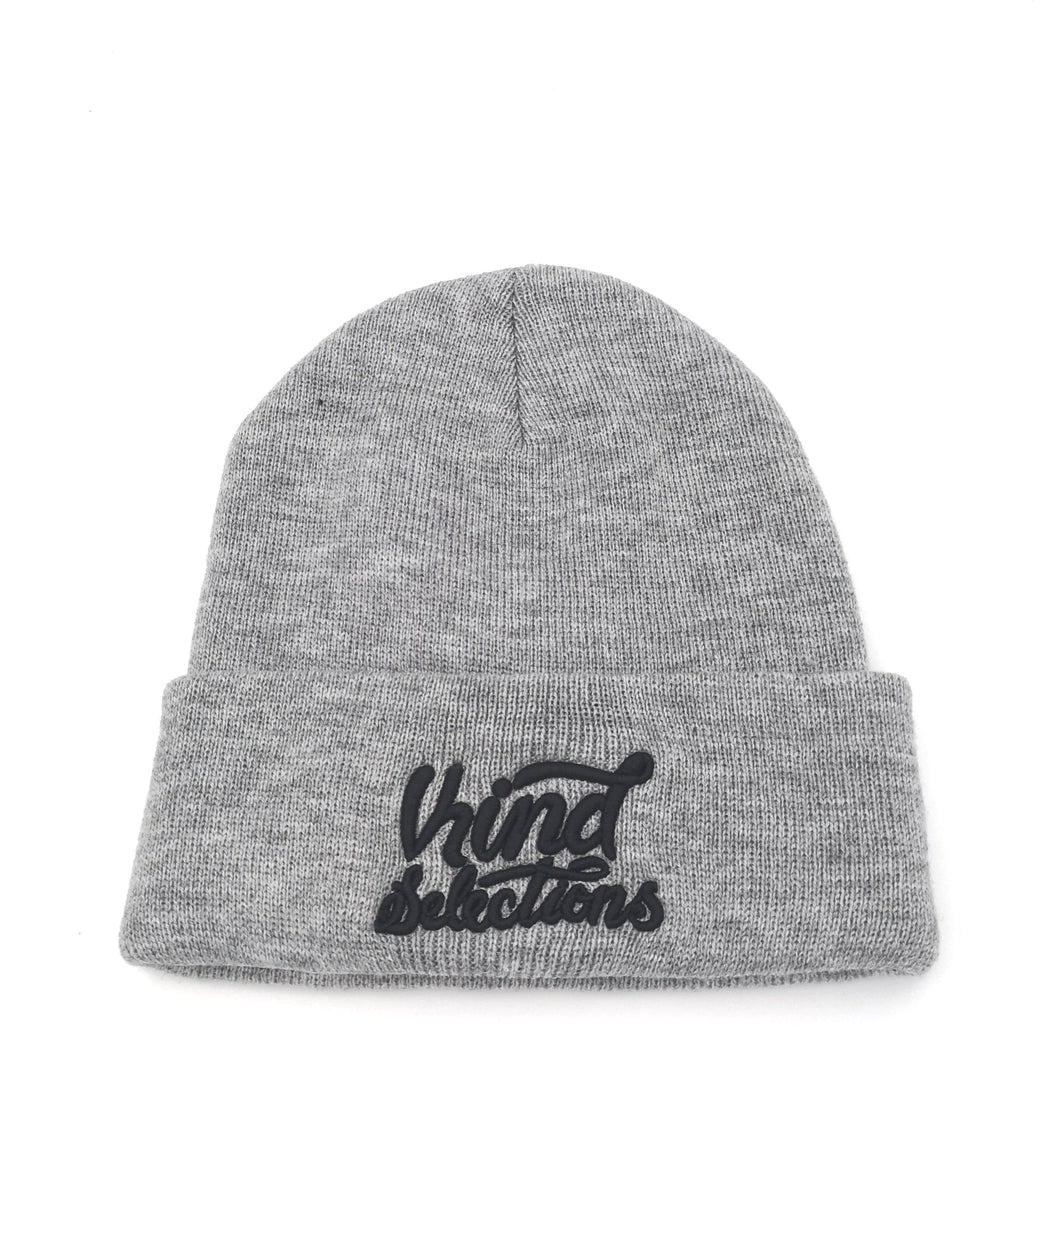 Kind Selections x Sloth King Design Limited Edition Knit Toque - Gray Script Font